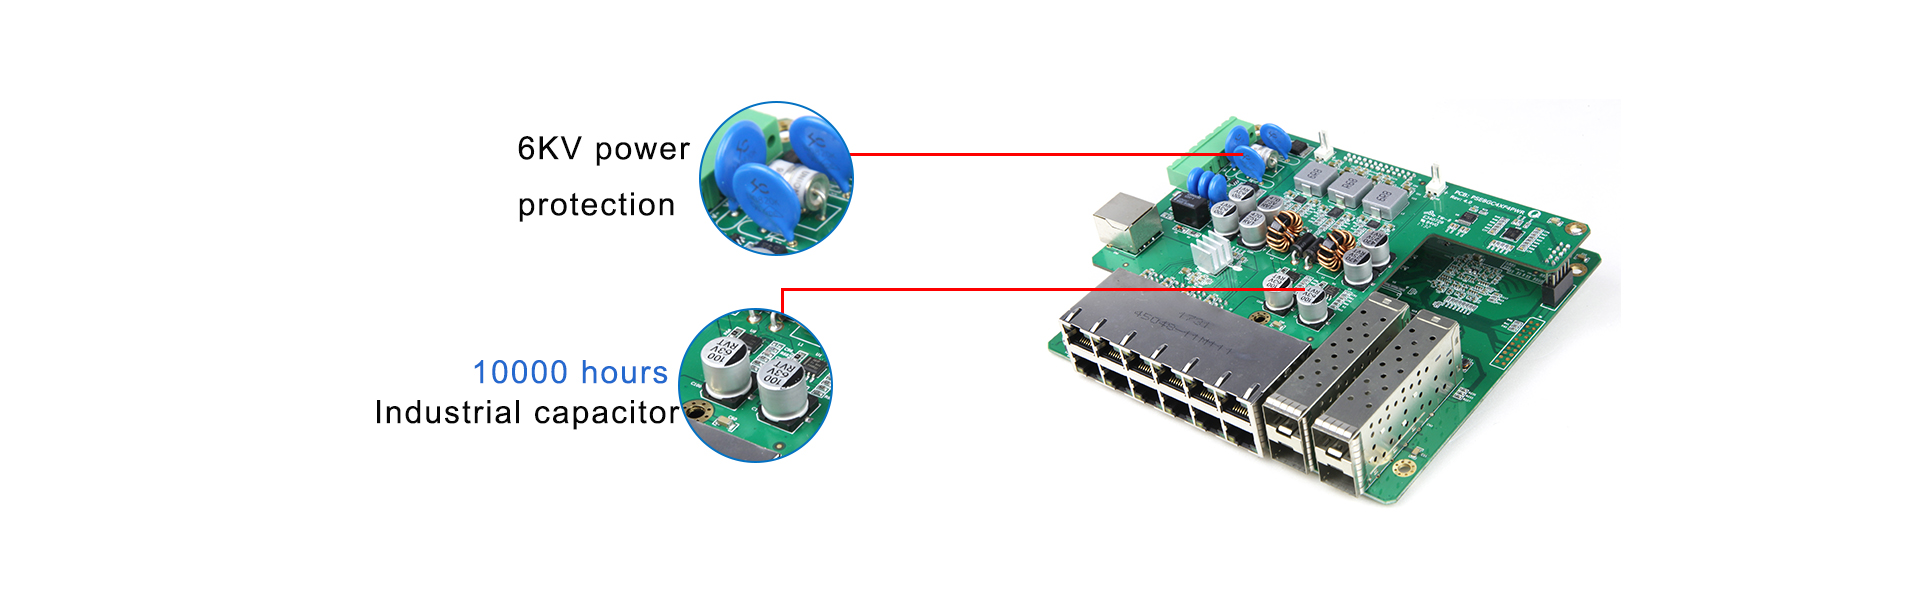 Industrial switch, Industrial PoE switch, Industrial Ethernet switch